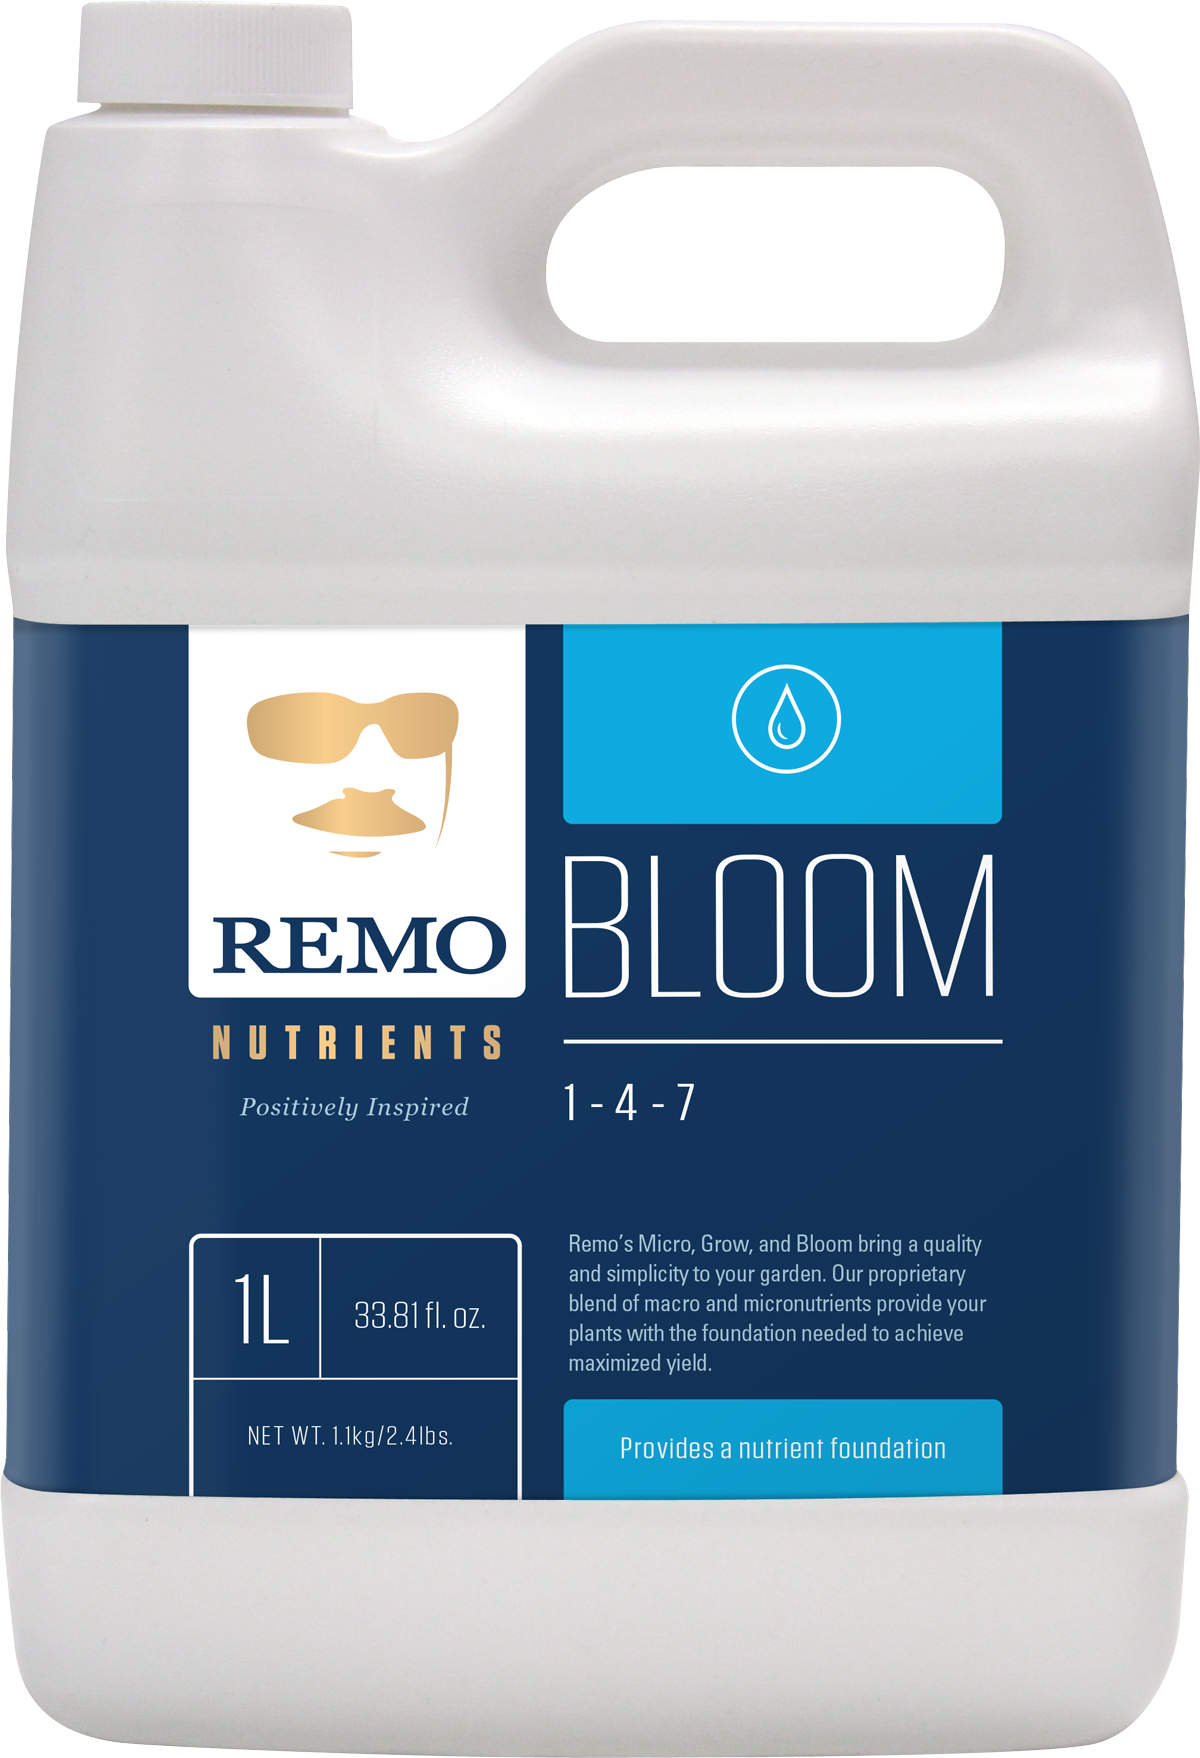 Remo Nutrients Bloom | Nutrient Growth Systems Canada